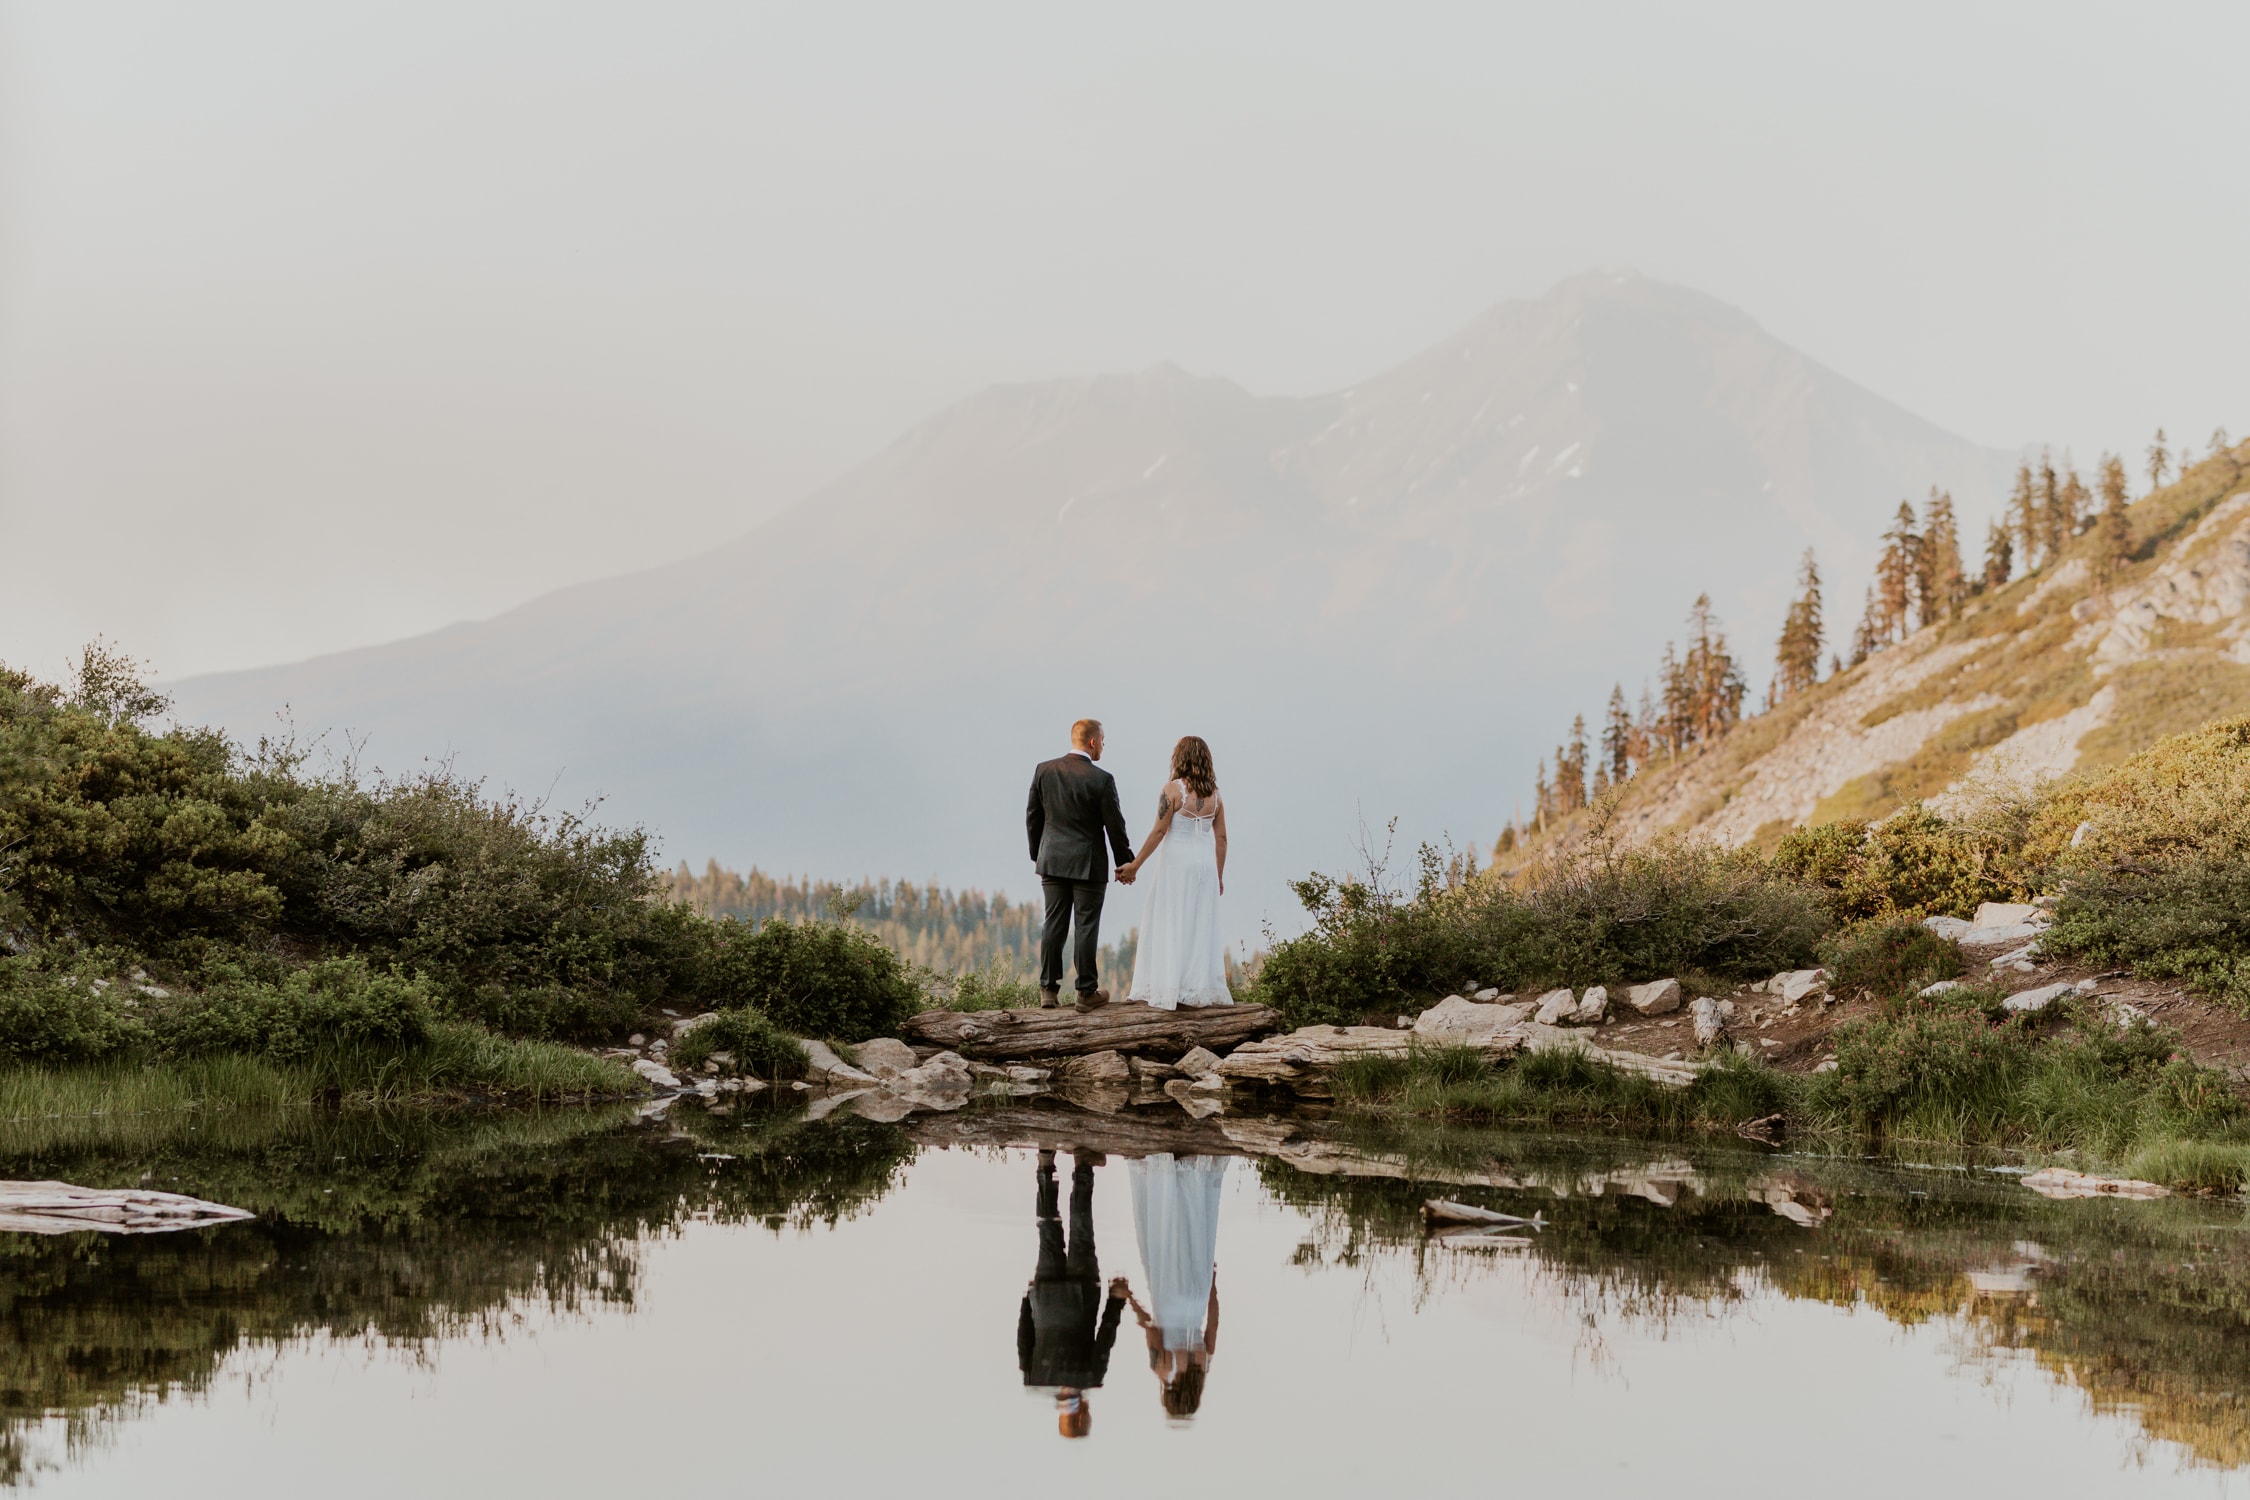 A couple holding hands in front of Mt. Shasta on their wedding day.